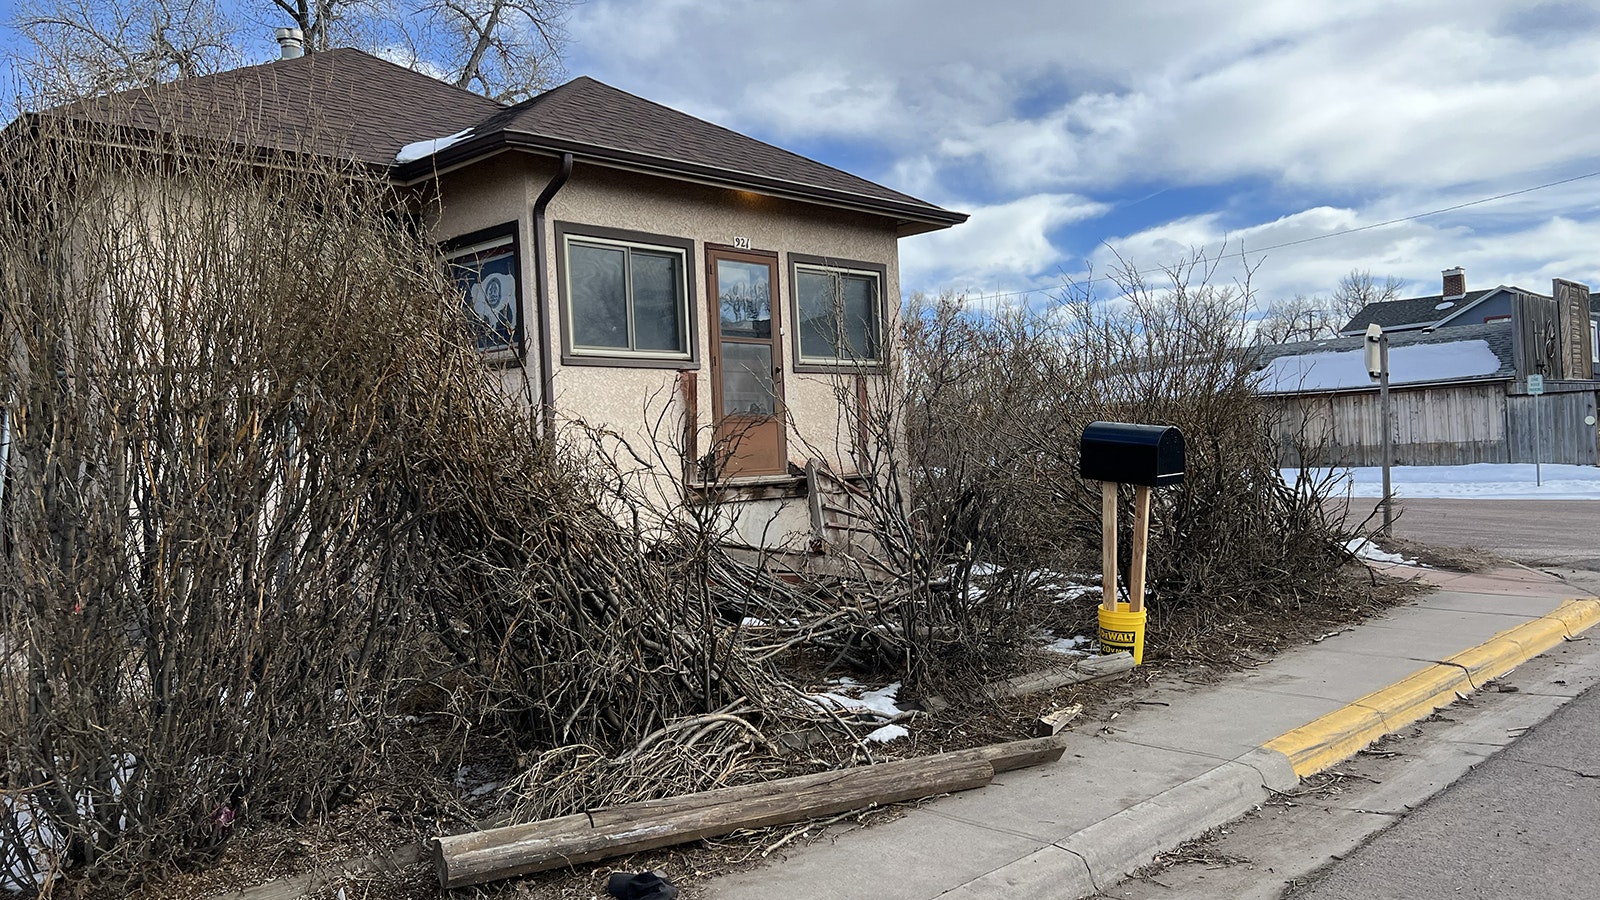 The front steps and porch of this house were taken out by a car that led Laramie police on a chase exceeding 100 mph at one point.